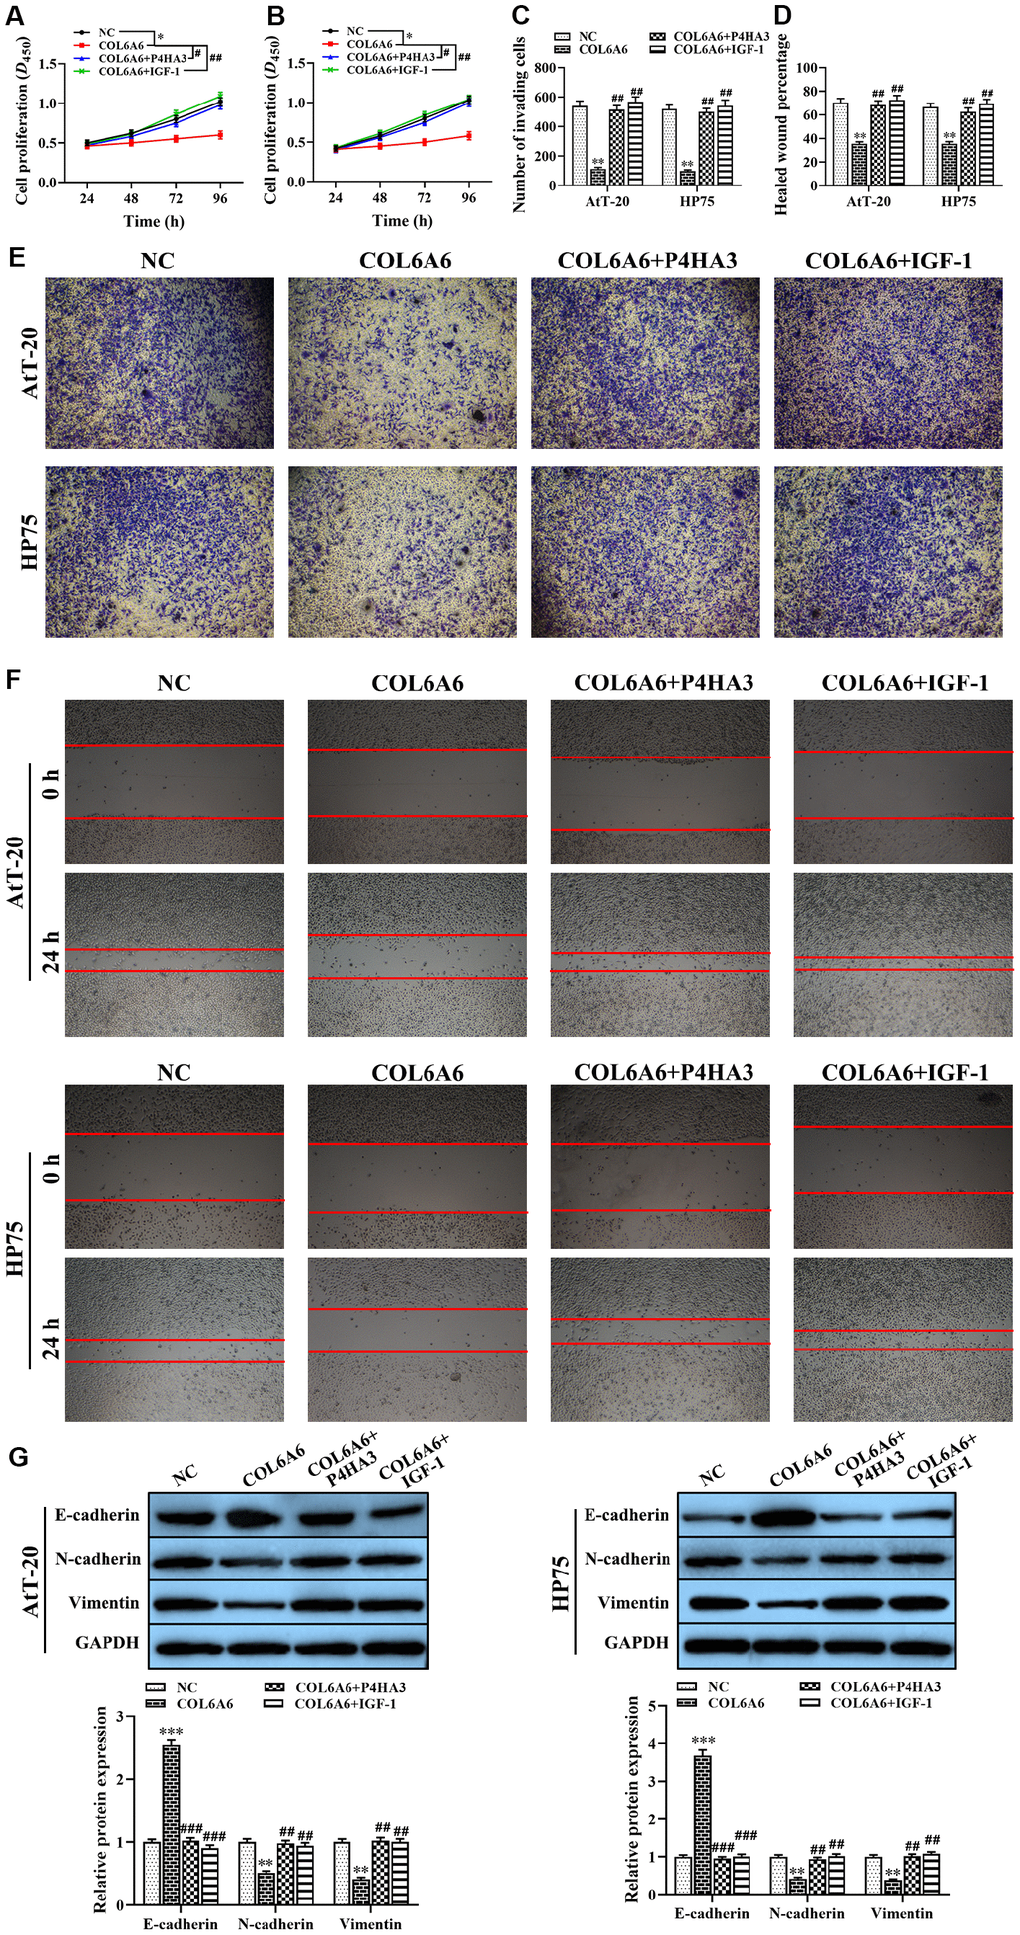 The effect of COL6A6 interacted with P4HA3 on the proliferation, invasion, migration, and EMT of AtT-20 and HP75 cells through regulating the PI3K-Akt pathway. (A and B: The proliferation ability of AtT-20 and HP75 cells were measured by CCK-8 assay; (C and E) The invasion of AtT-20 and HP75 cells were measured by Transwell assay (40×); (D and F) The migration ability of AtT-20 and HP75 cells were evaluated by wound healing assay (4×); (G) The expression of EMT related proteins in AtT-20 and HP75 cells were detected by western blotting. *P**P***P#P##P###P